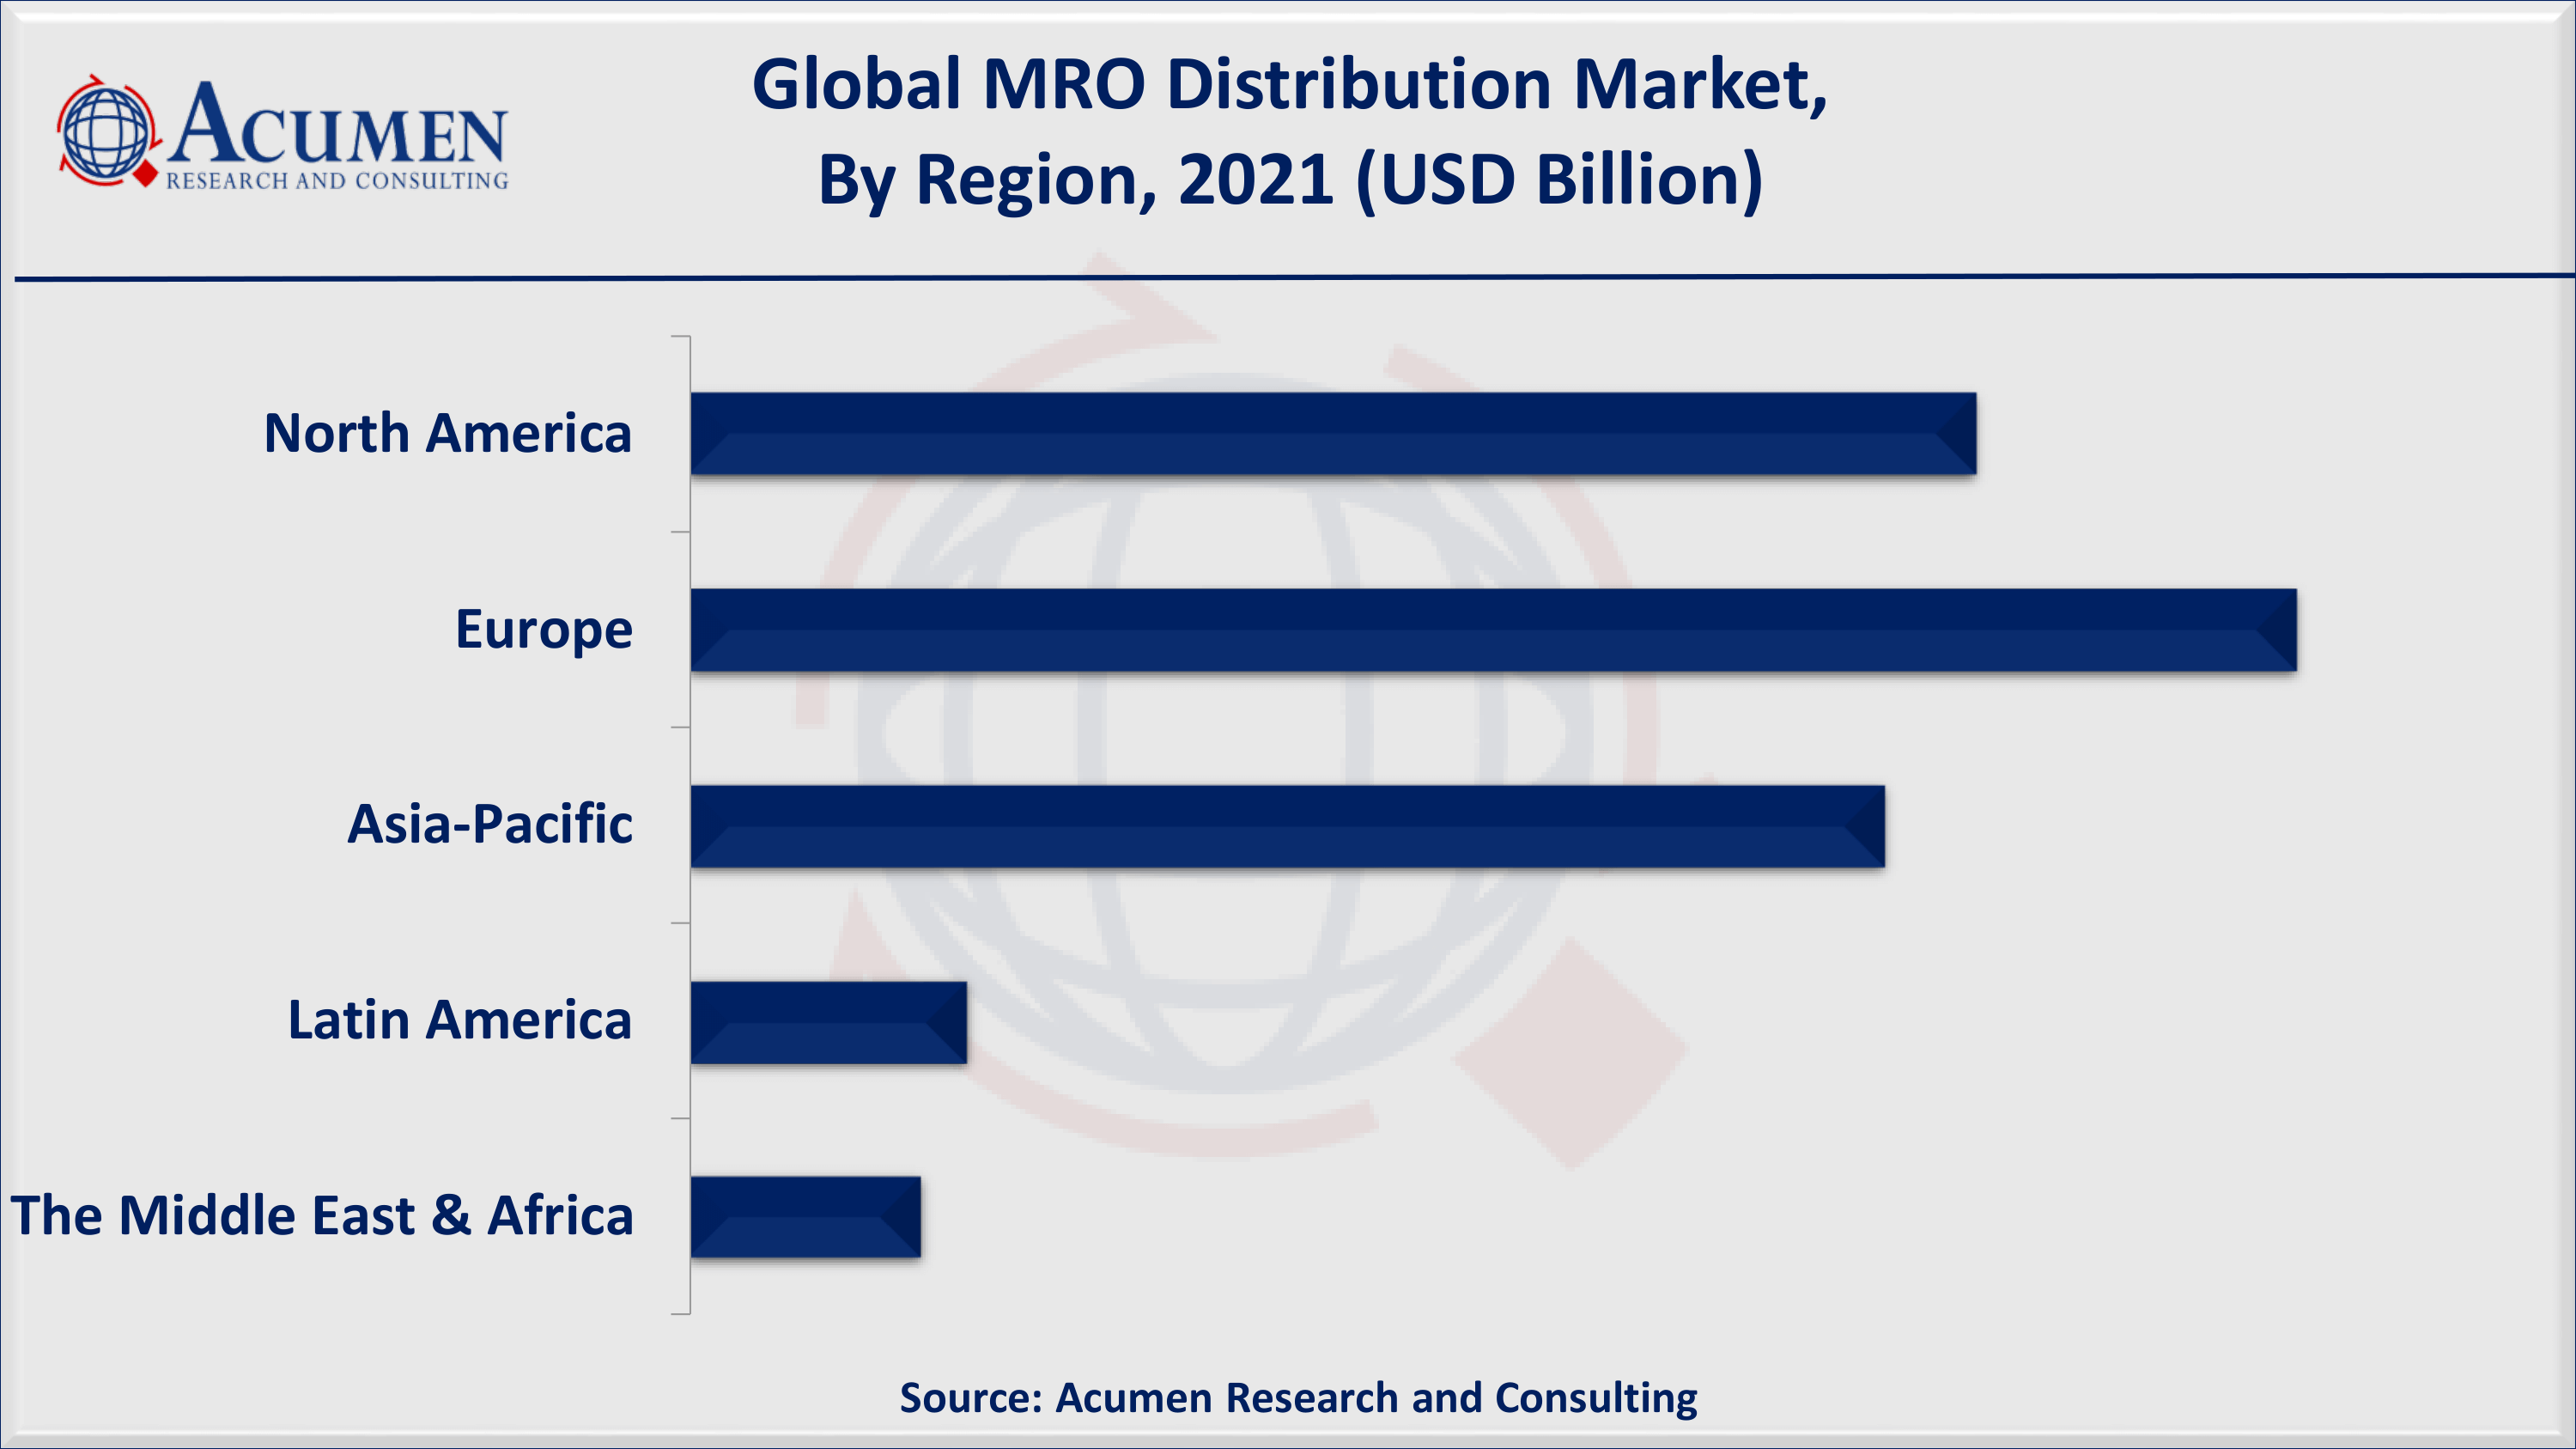 North America MRO distribution market share accounted for over 35% shares in 2021